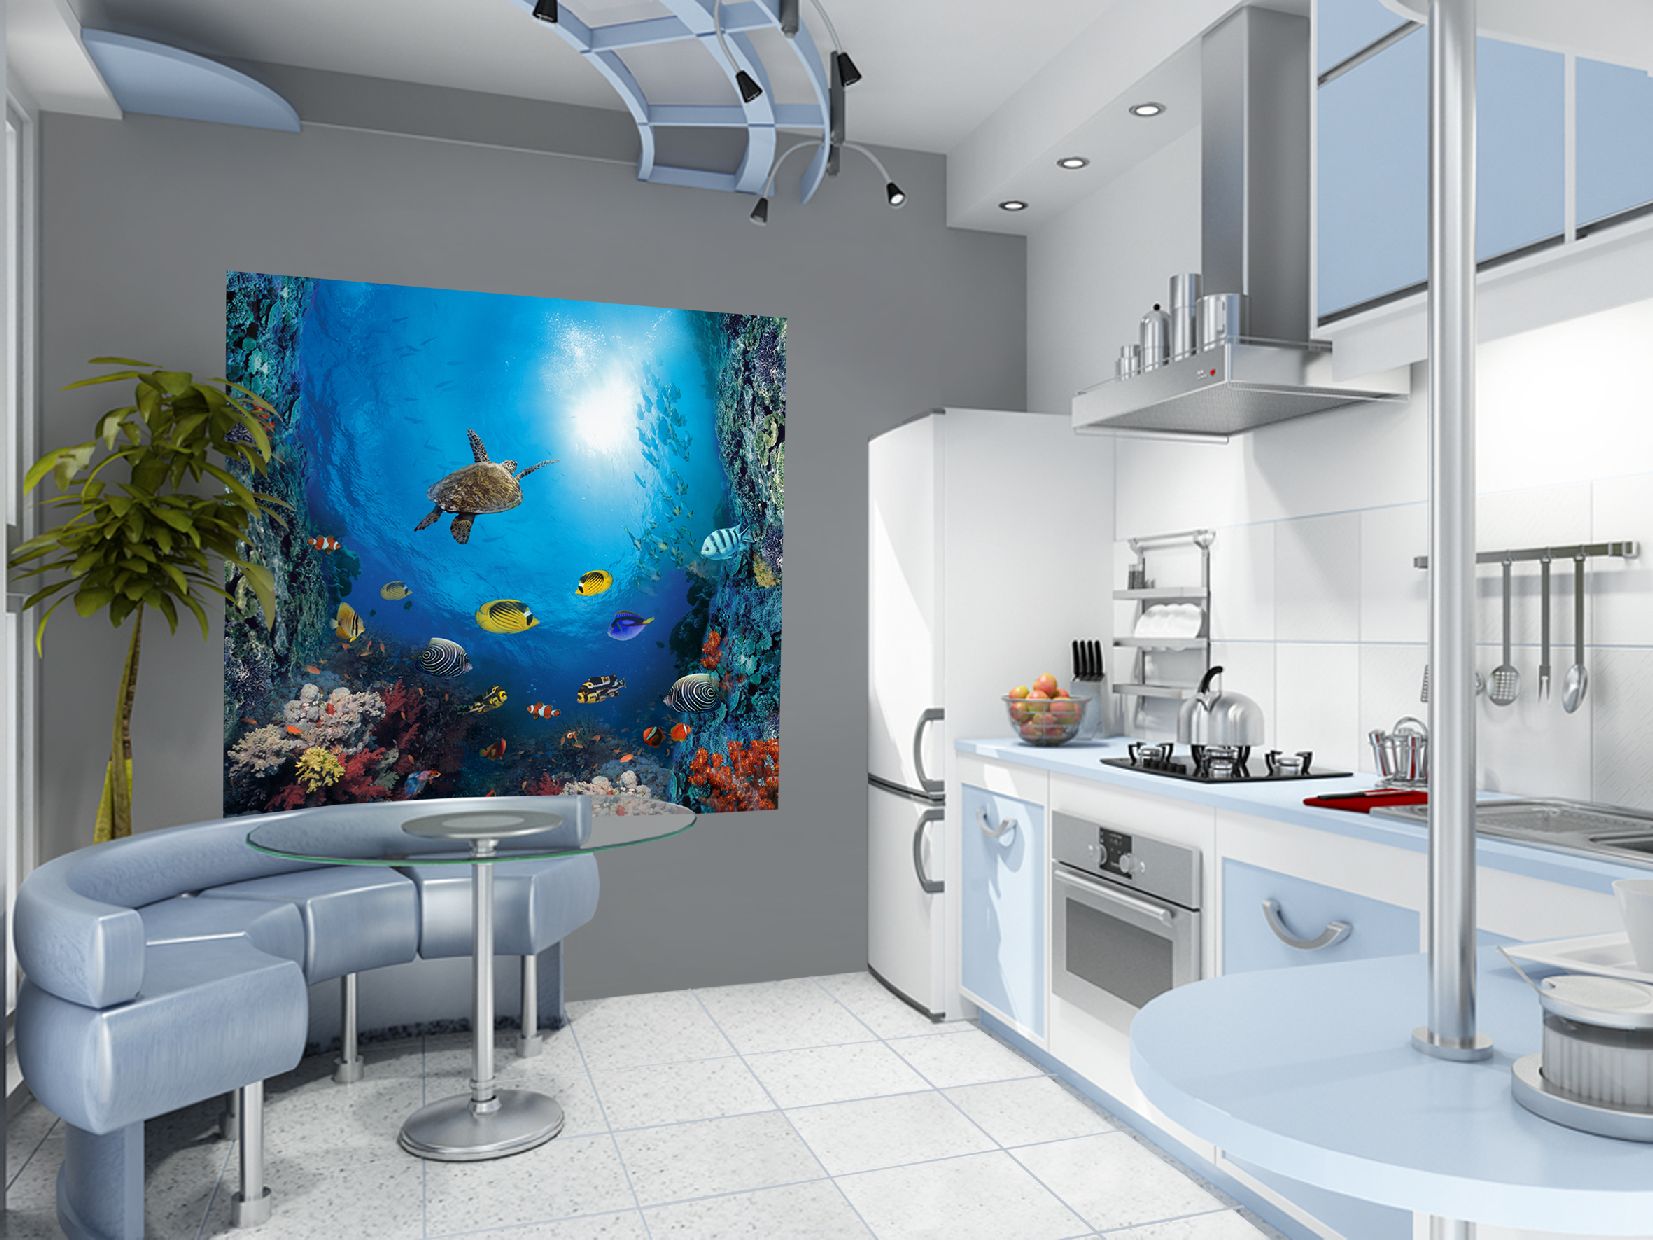 Custom-made kitchen wall mural in Europe